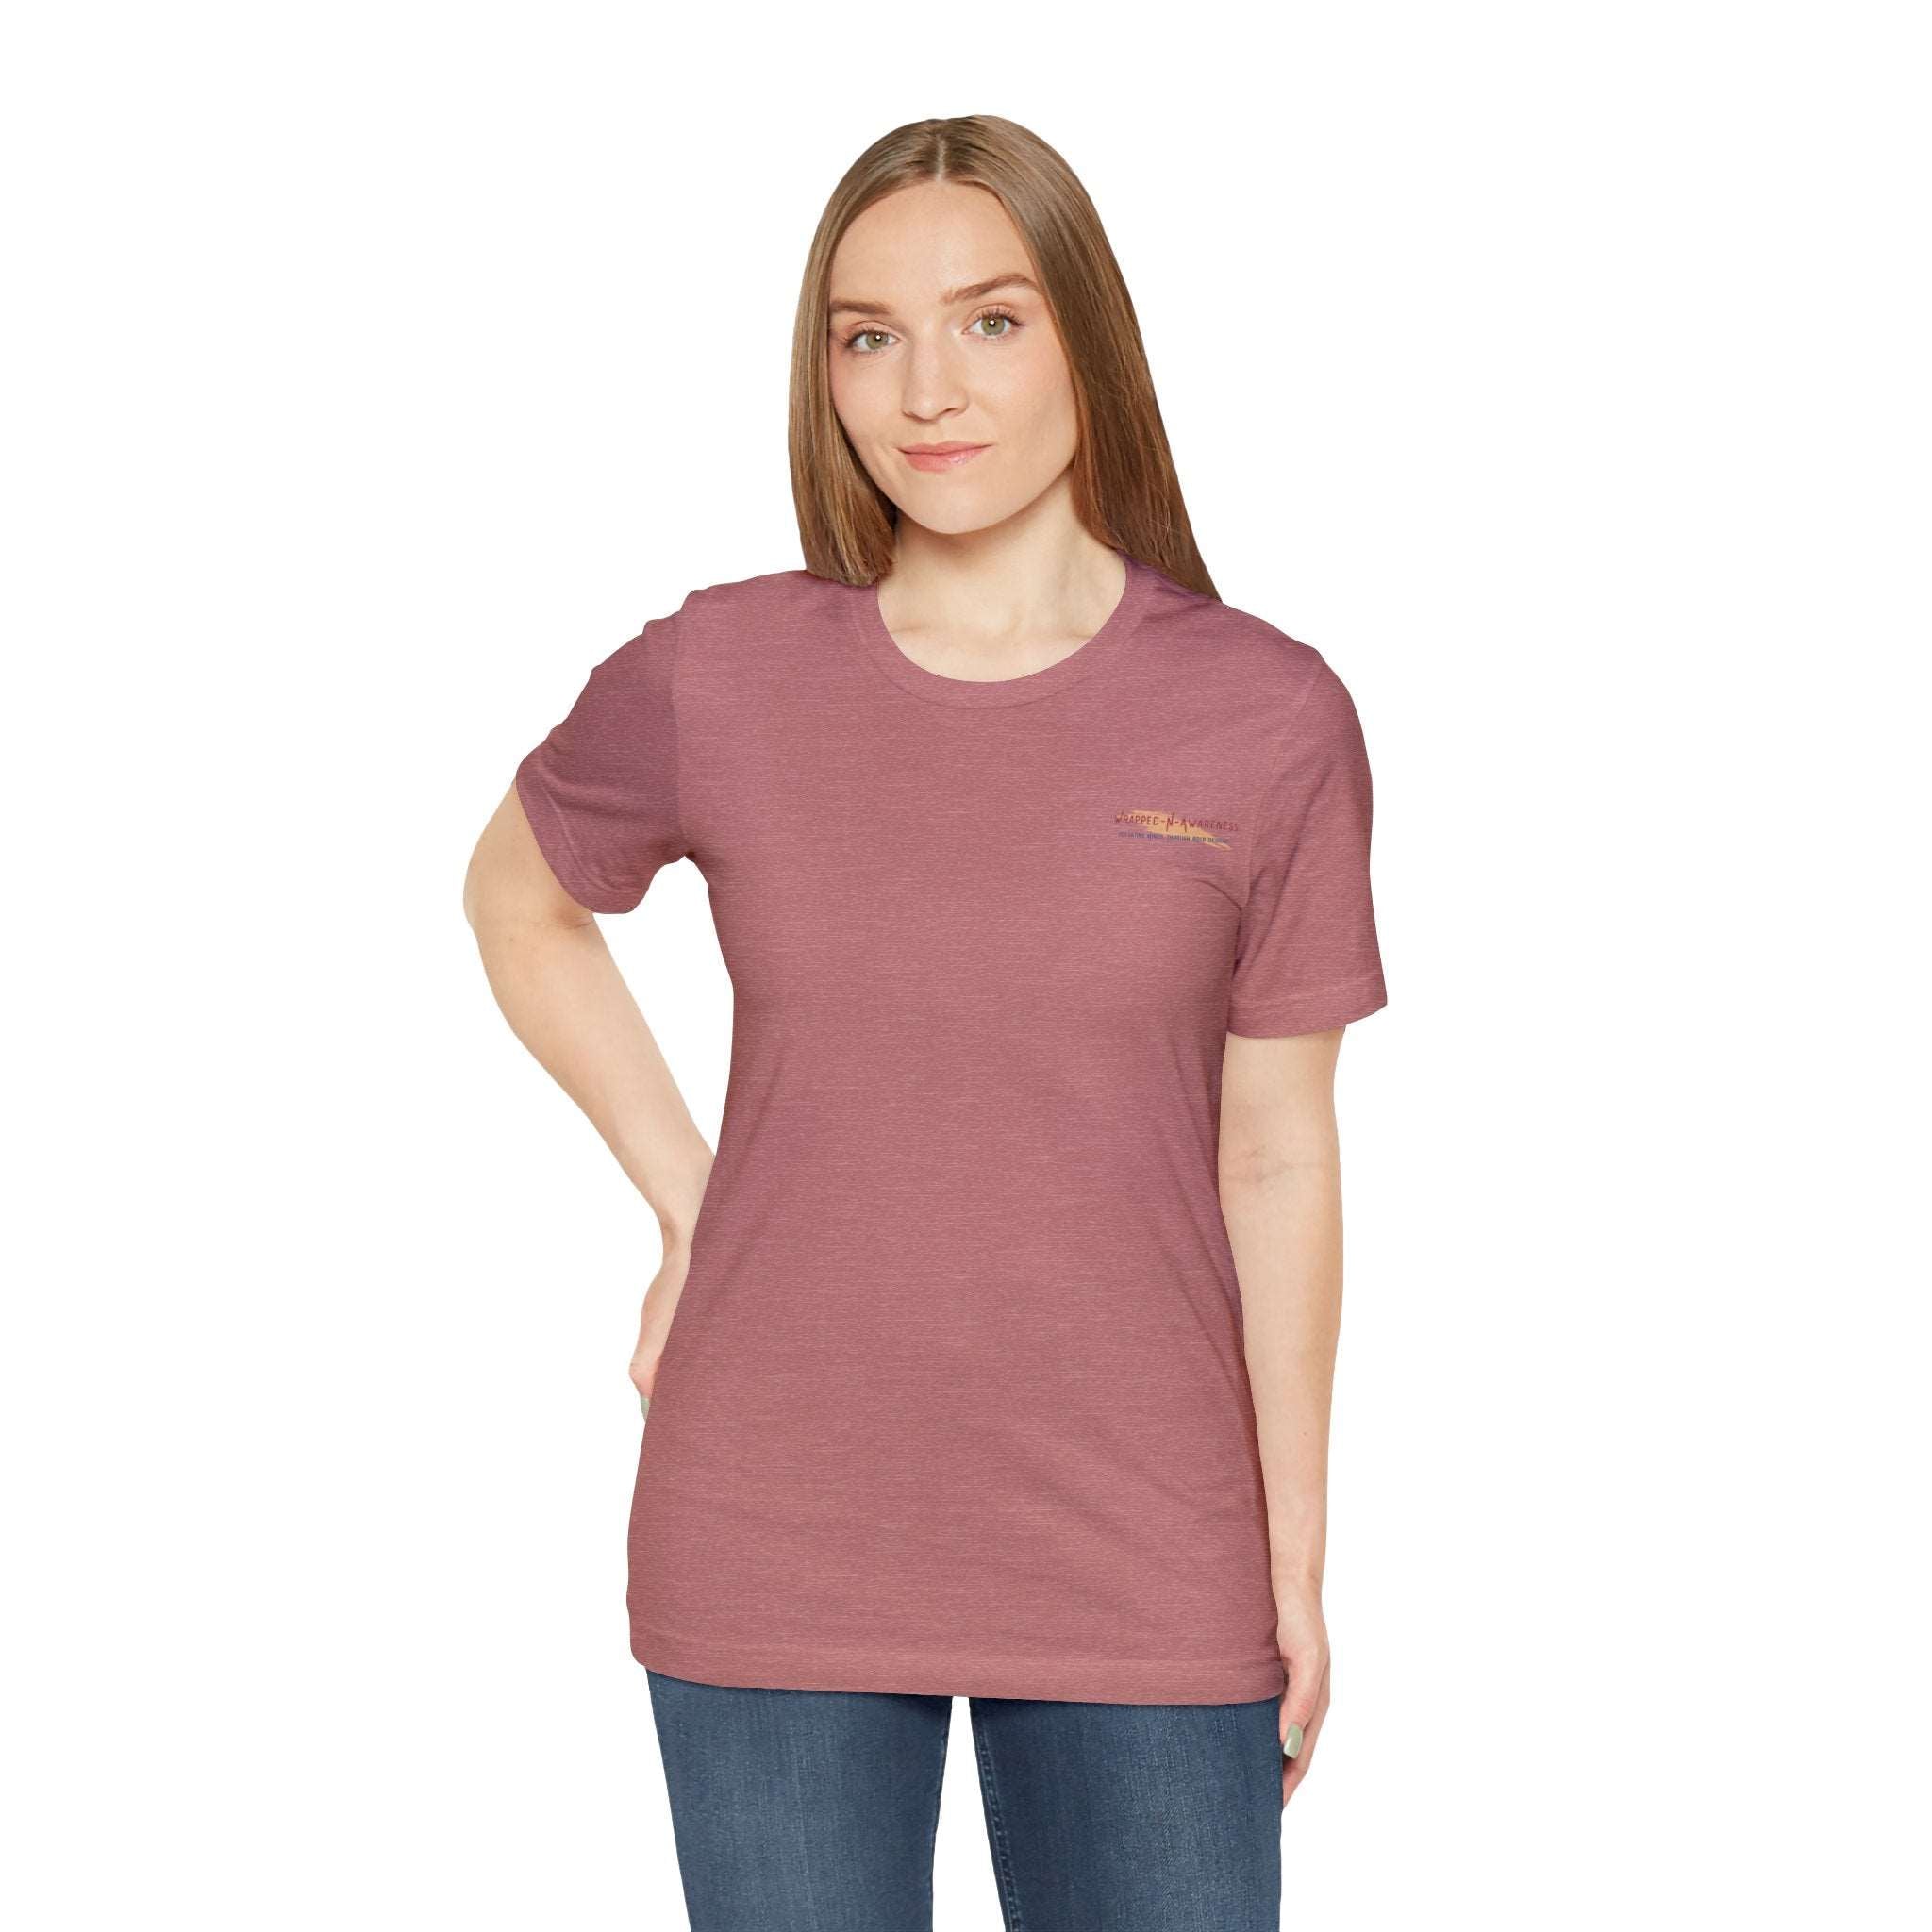 Find Your Balance Jersey Tee - Bella+Canvas 3001 Heather Mauve Airlume Cotton Bella+Canvas 3001 Crew Neckline Jersey Short Sleeve Lightweight Fabric Mental Health Support Retail Fit Tear-away Label Tee Unisex Tee T-Shirt 9965092522171130432_2048_bf6df0ad-e616-4bc0-8766-594a11fdd6b3 Printify